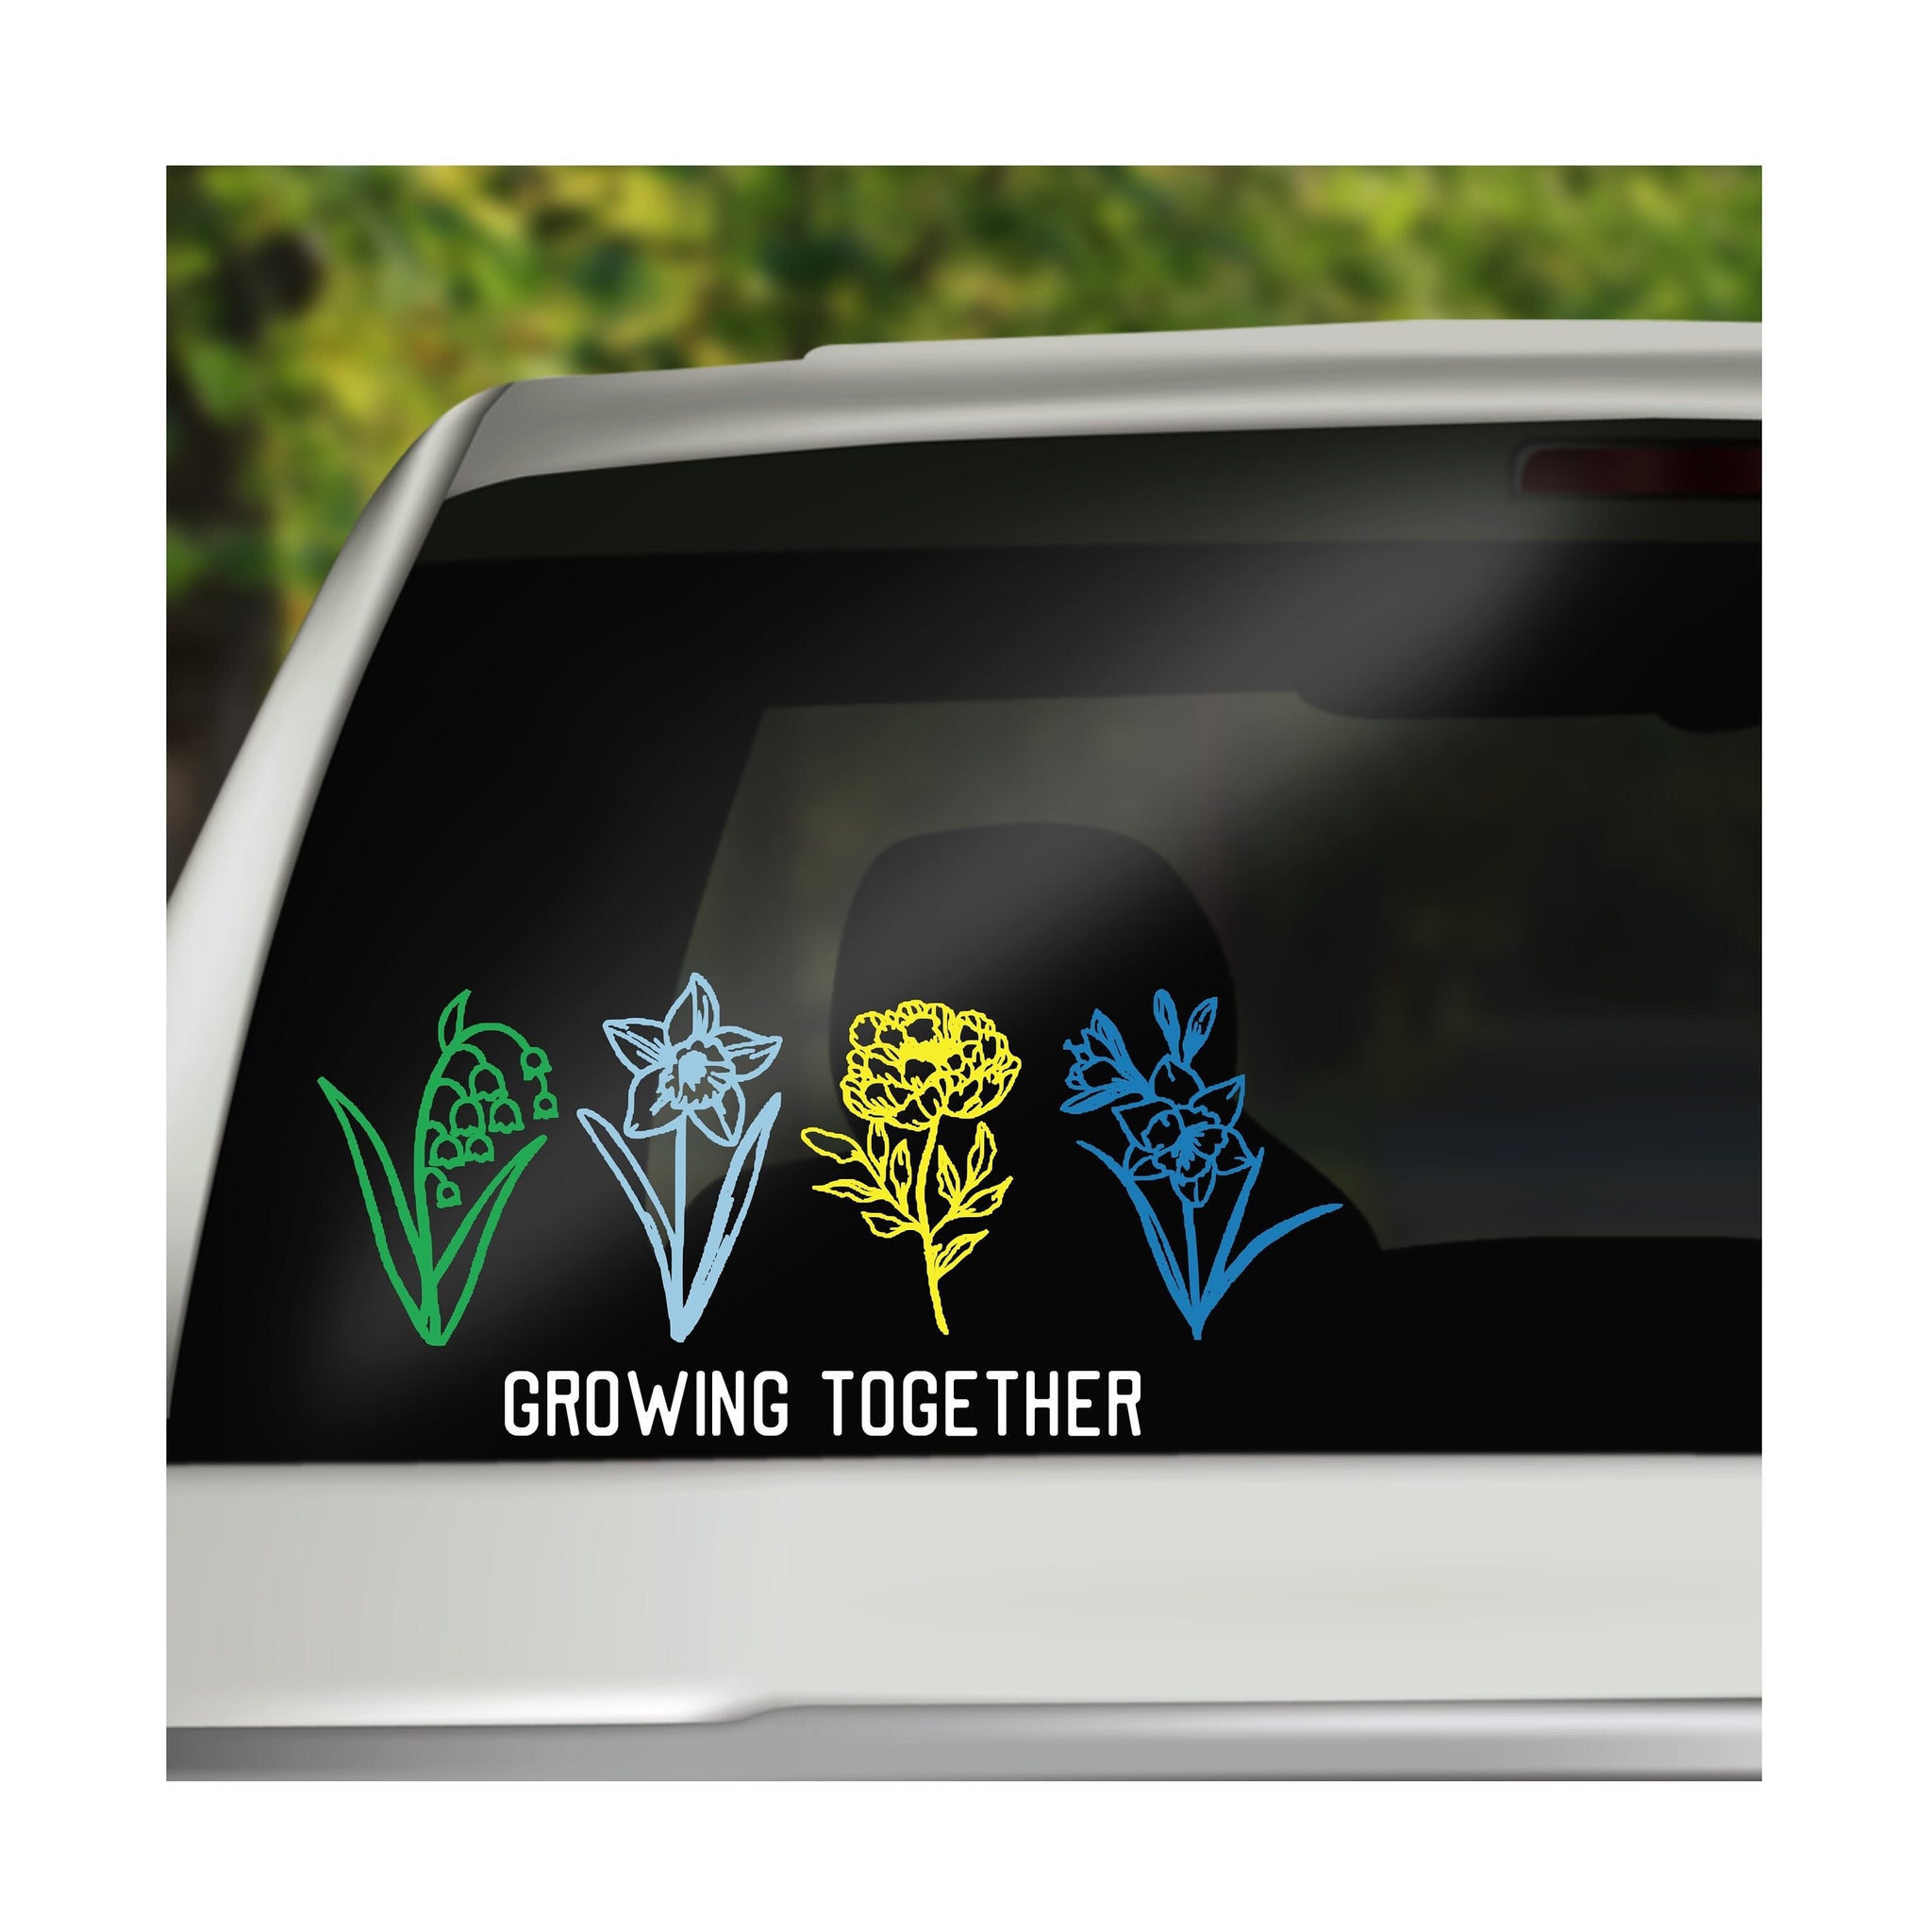 Family Car Decals, Birth Month Flower Decal, Family Car Sticker, Car Window Family, Flower Family Decal, Wildflower Stickers, My Car Family